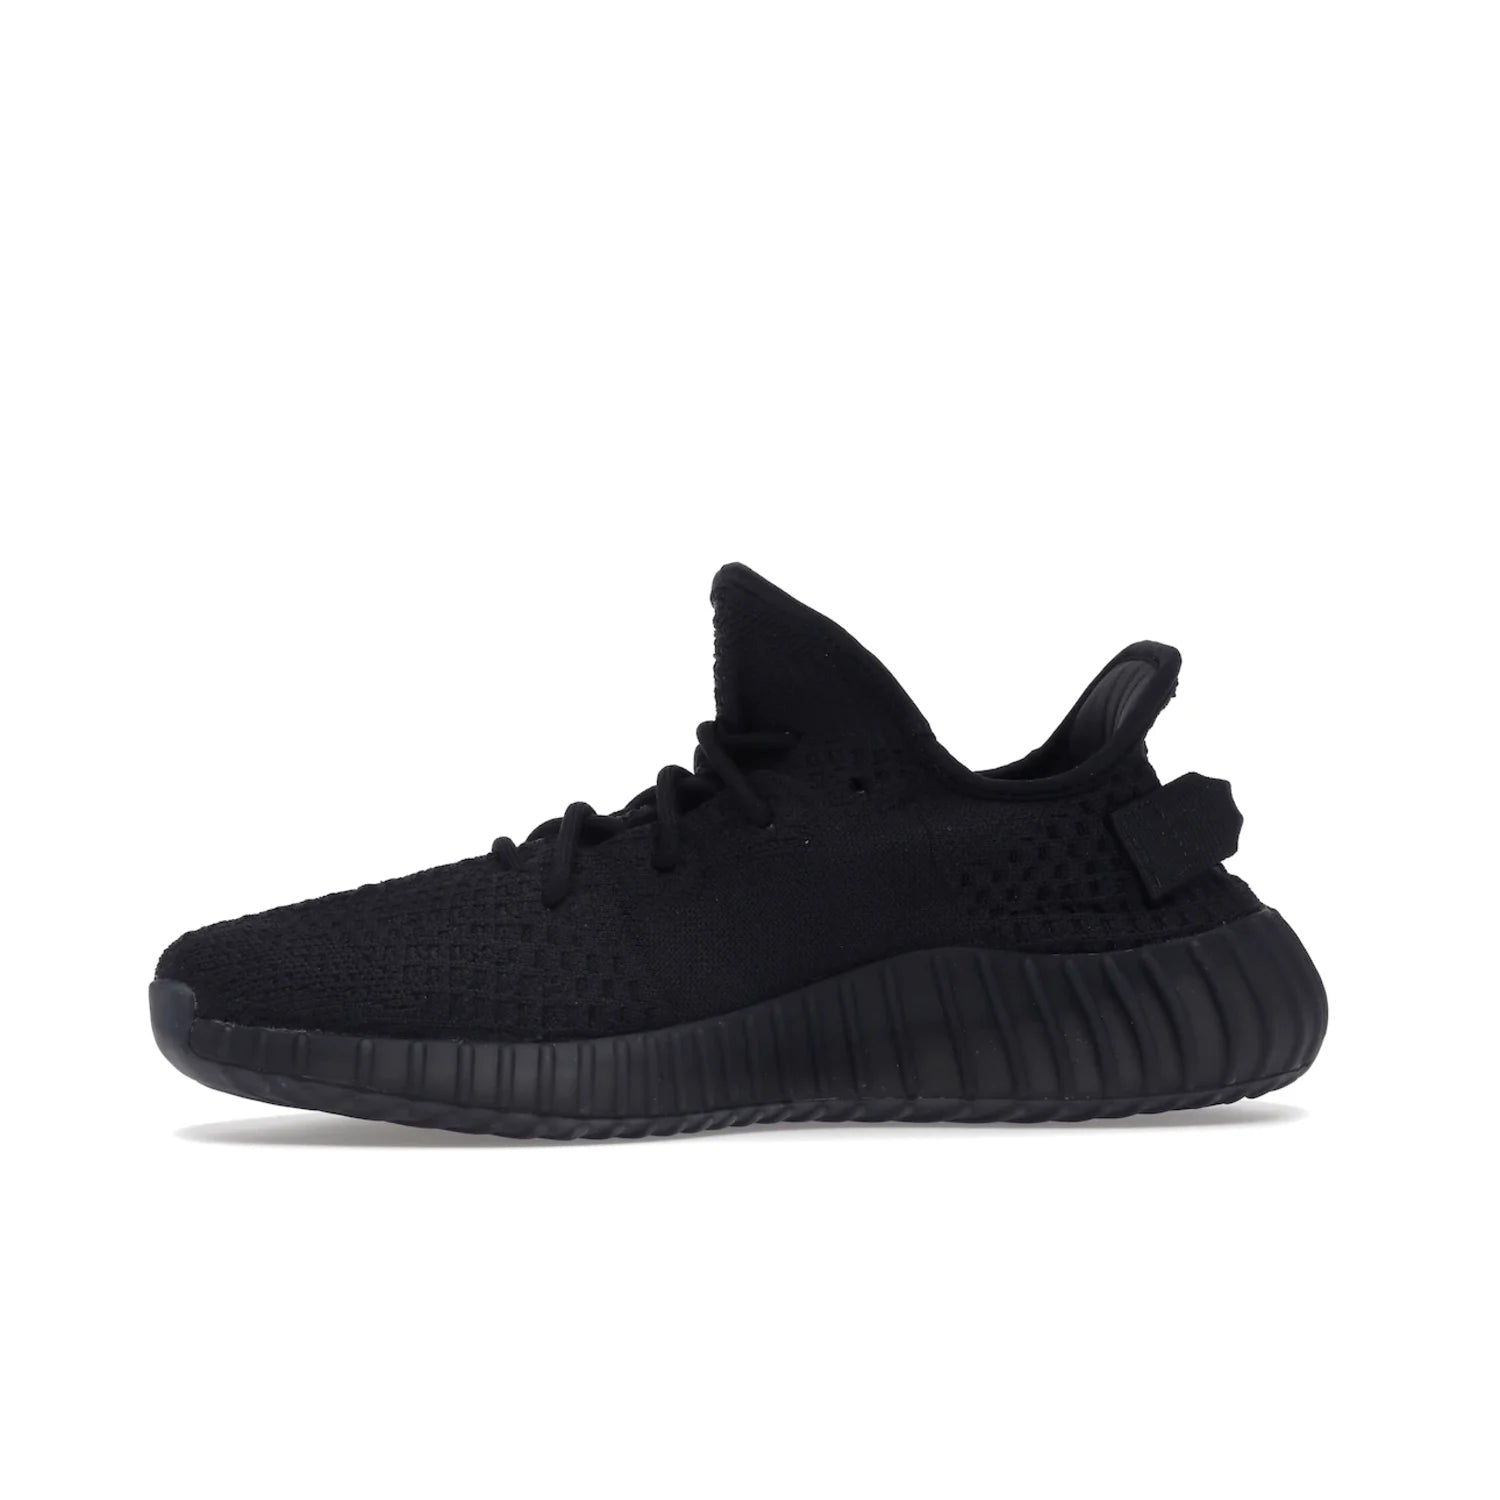 adidas Yeezy Boost 350 V2 Onyx - Image 18 - Only at www.BallersClubKickz.com - Adidas Yeezy Boost 350 V2 Onyx Triple Black shoes for comfort and style. Arriving Spring 2022.